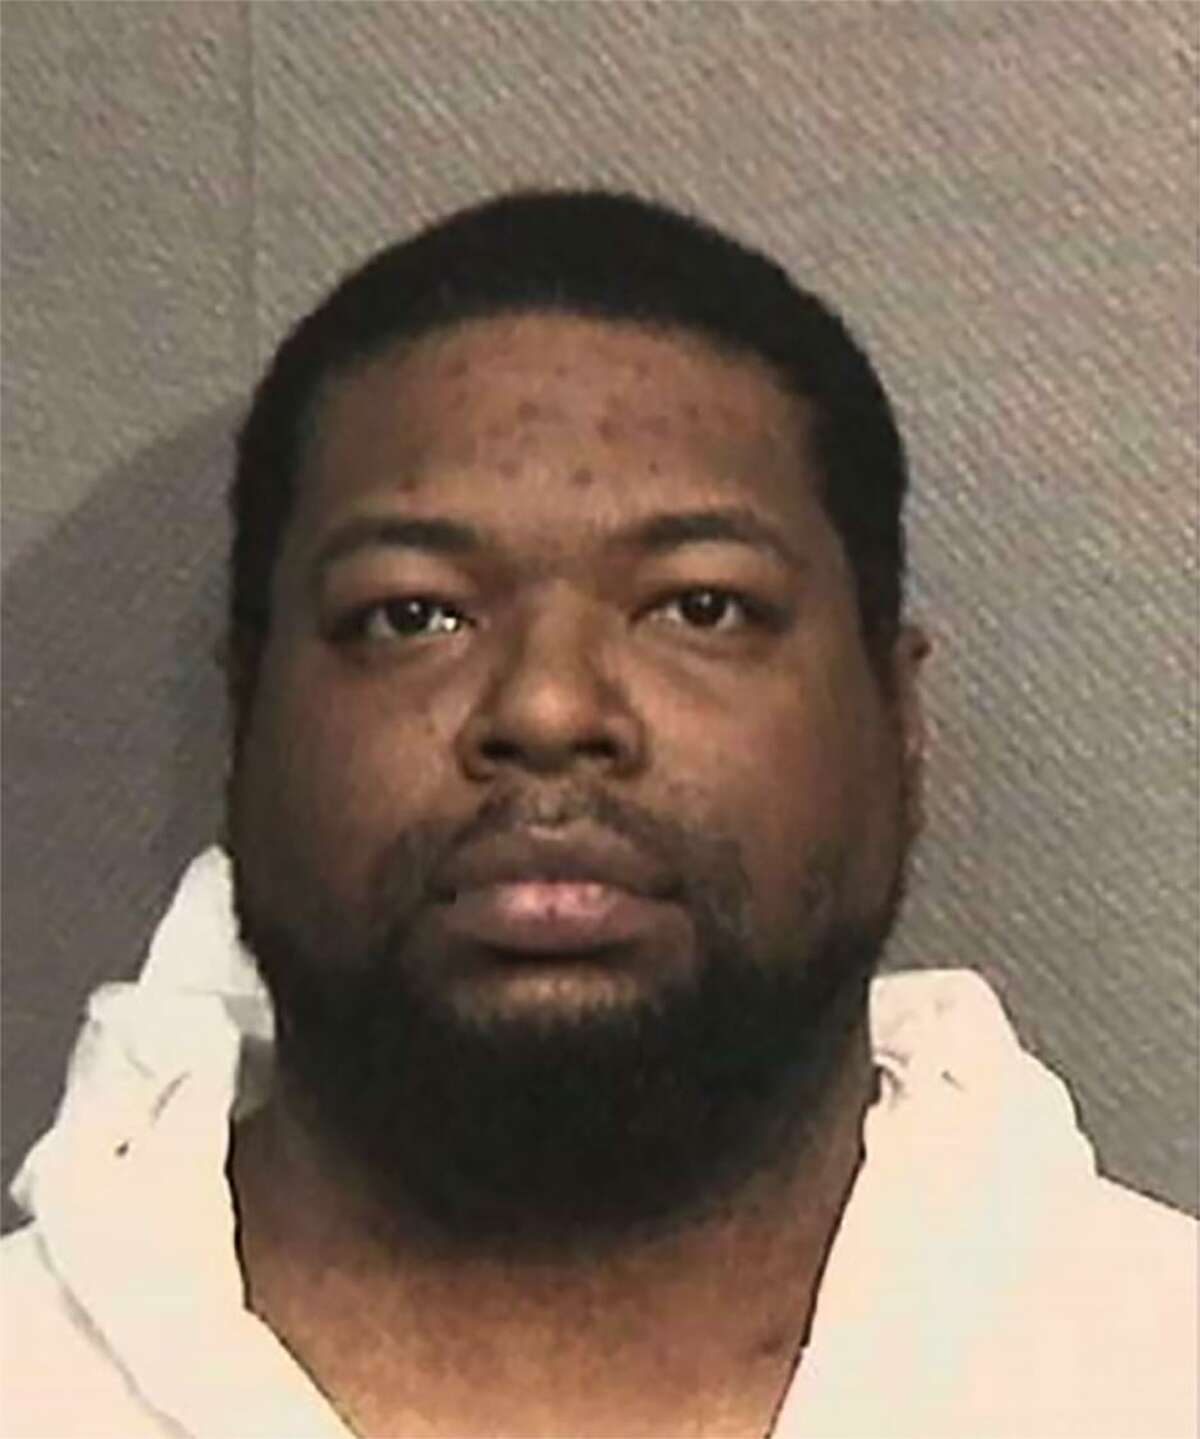 Jason Farmer, 34, strangled his future sister-in-law while they were having sex in a southwest Houston hotel has been charged with manslaughter.